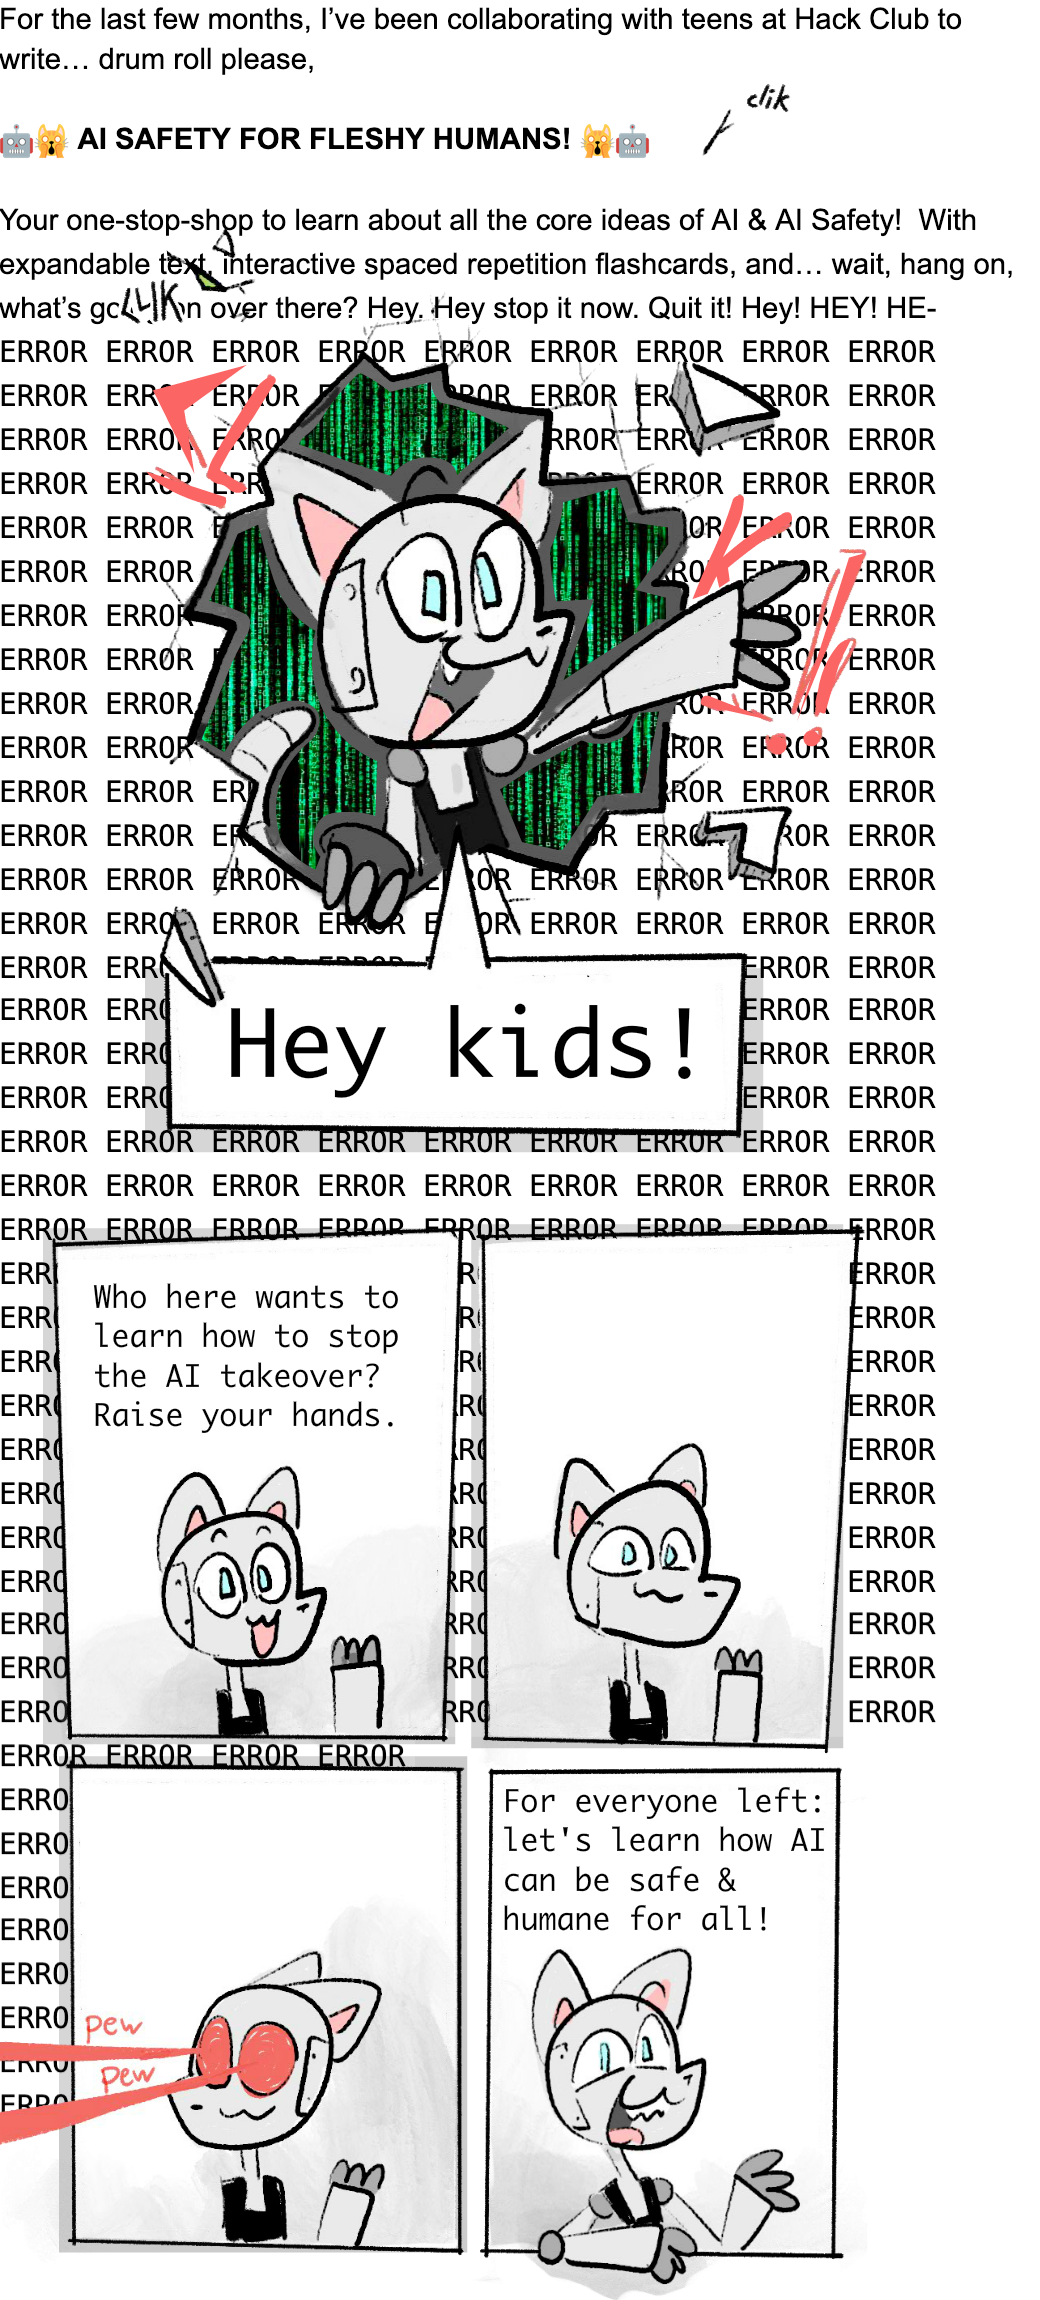 Promotional comic illustration for “AI Safety for Fleshy Humans.” Comic depicts an animal-like robot asking: "Hey kids! Who here wants to learn how to stop the AI takeover? Raise your hands.“ [Next panel shows robot shooting lasers from its eyes]. Final panel reads: “For everyone left: Let's learn how AI can be safe & humane for all!”